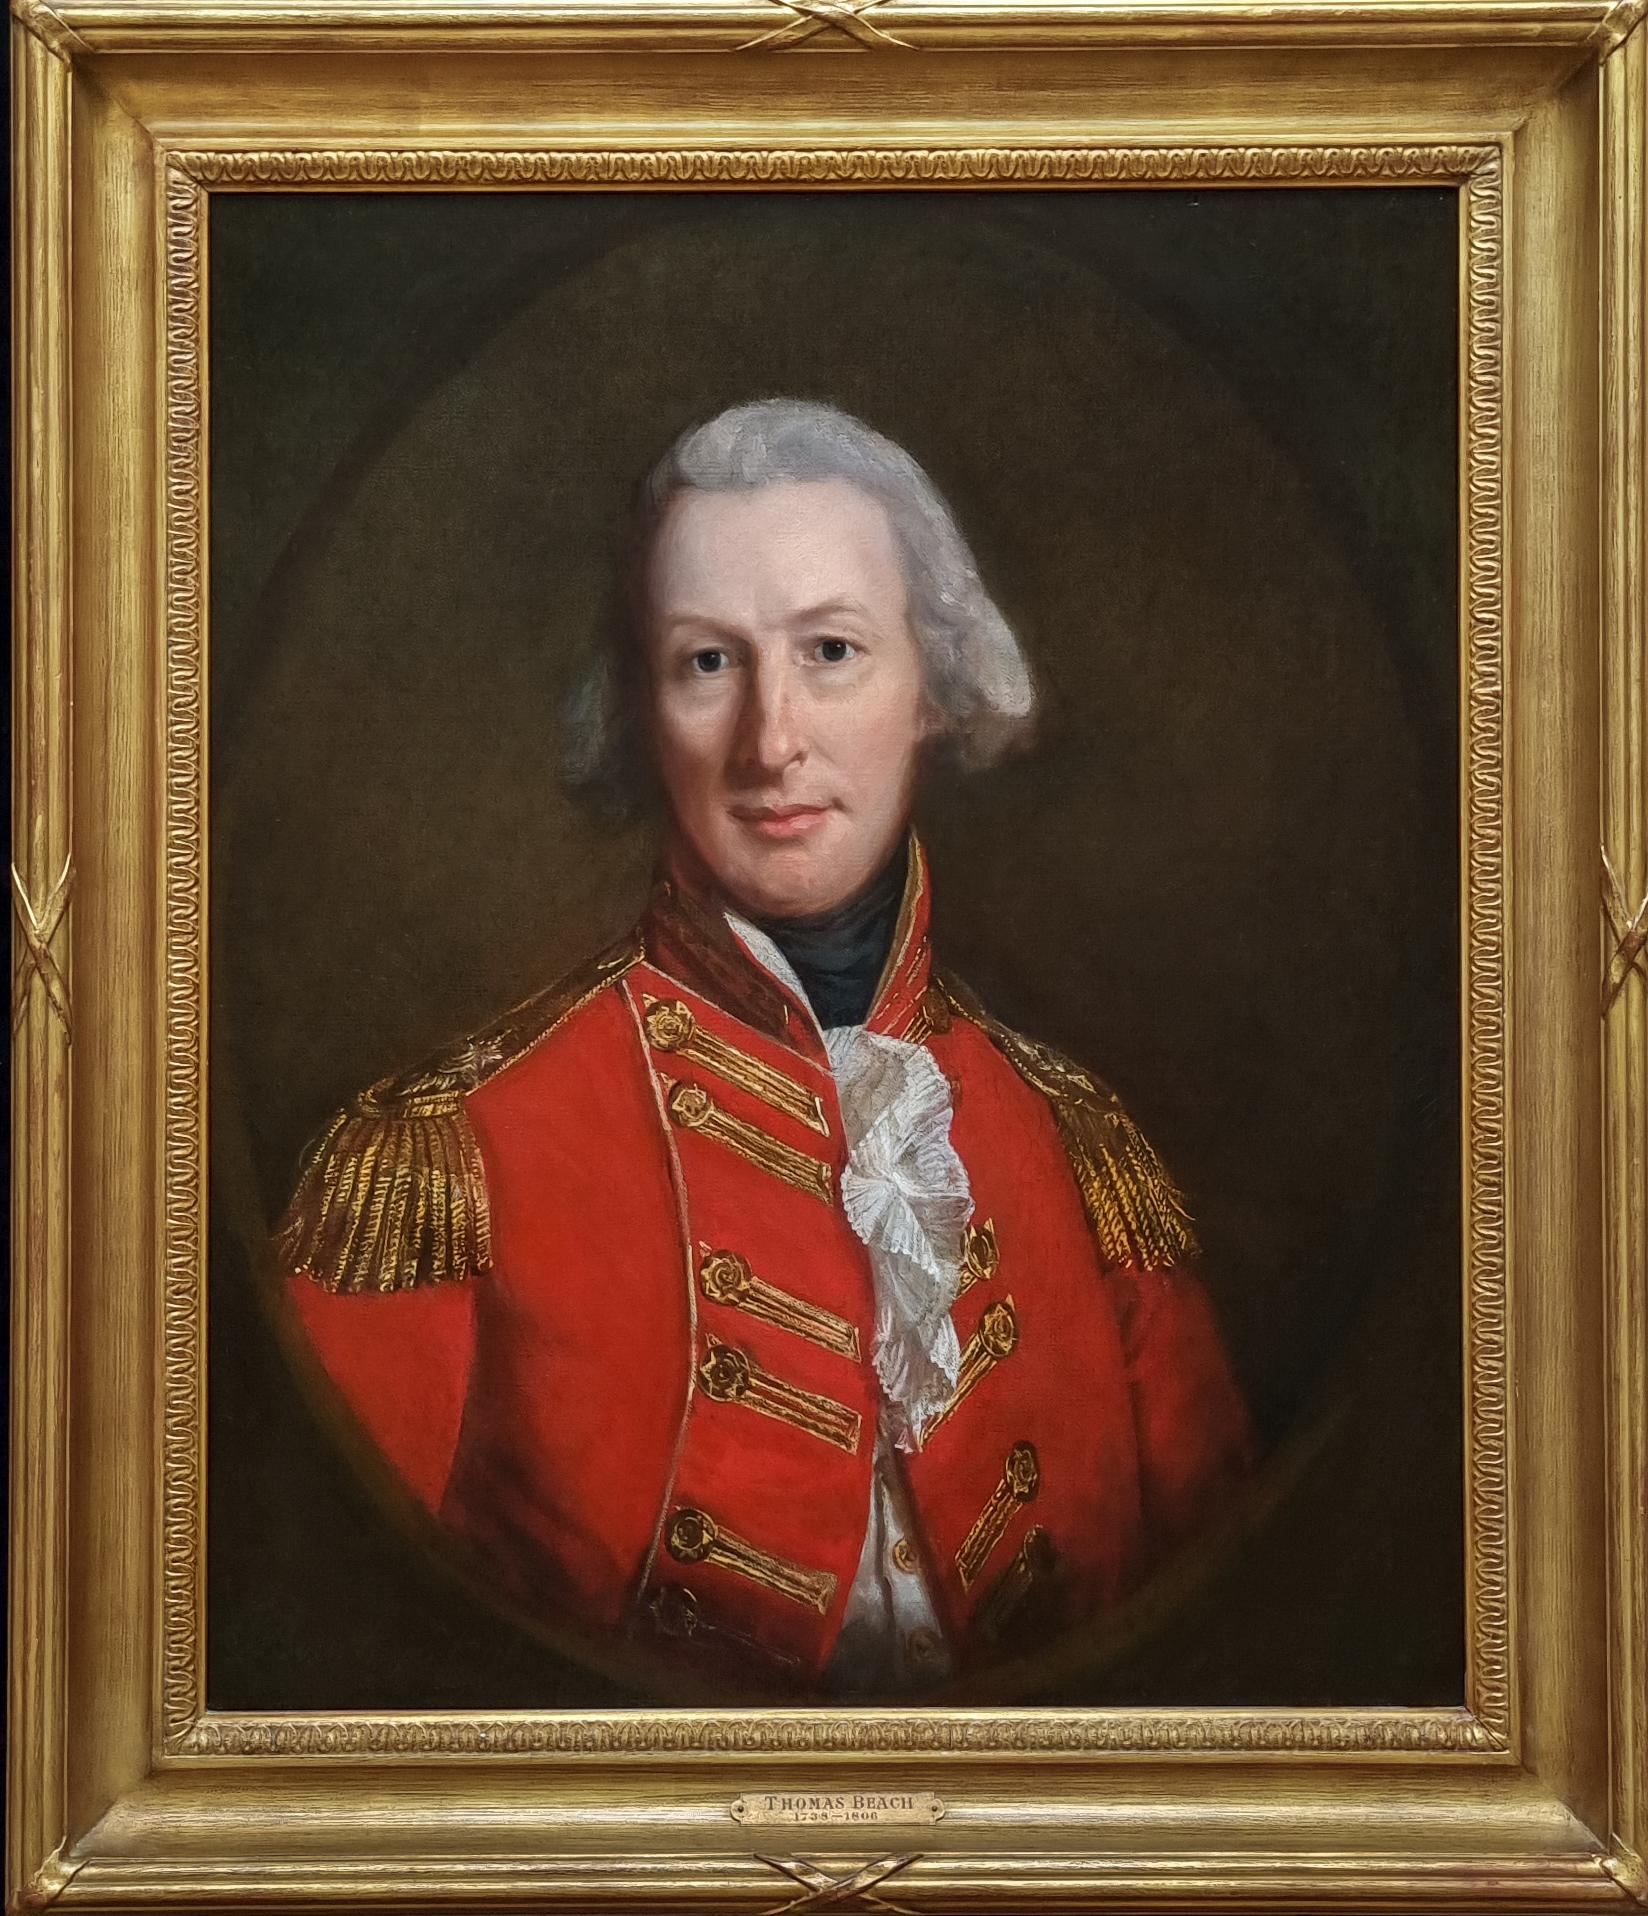 Portrait of Gentleman Officer, Signed & Dated 1796 by Thomas Beach Oil on canvas 1